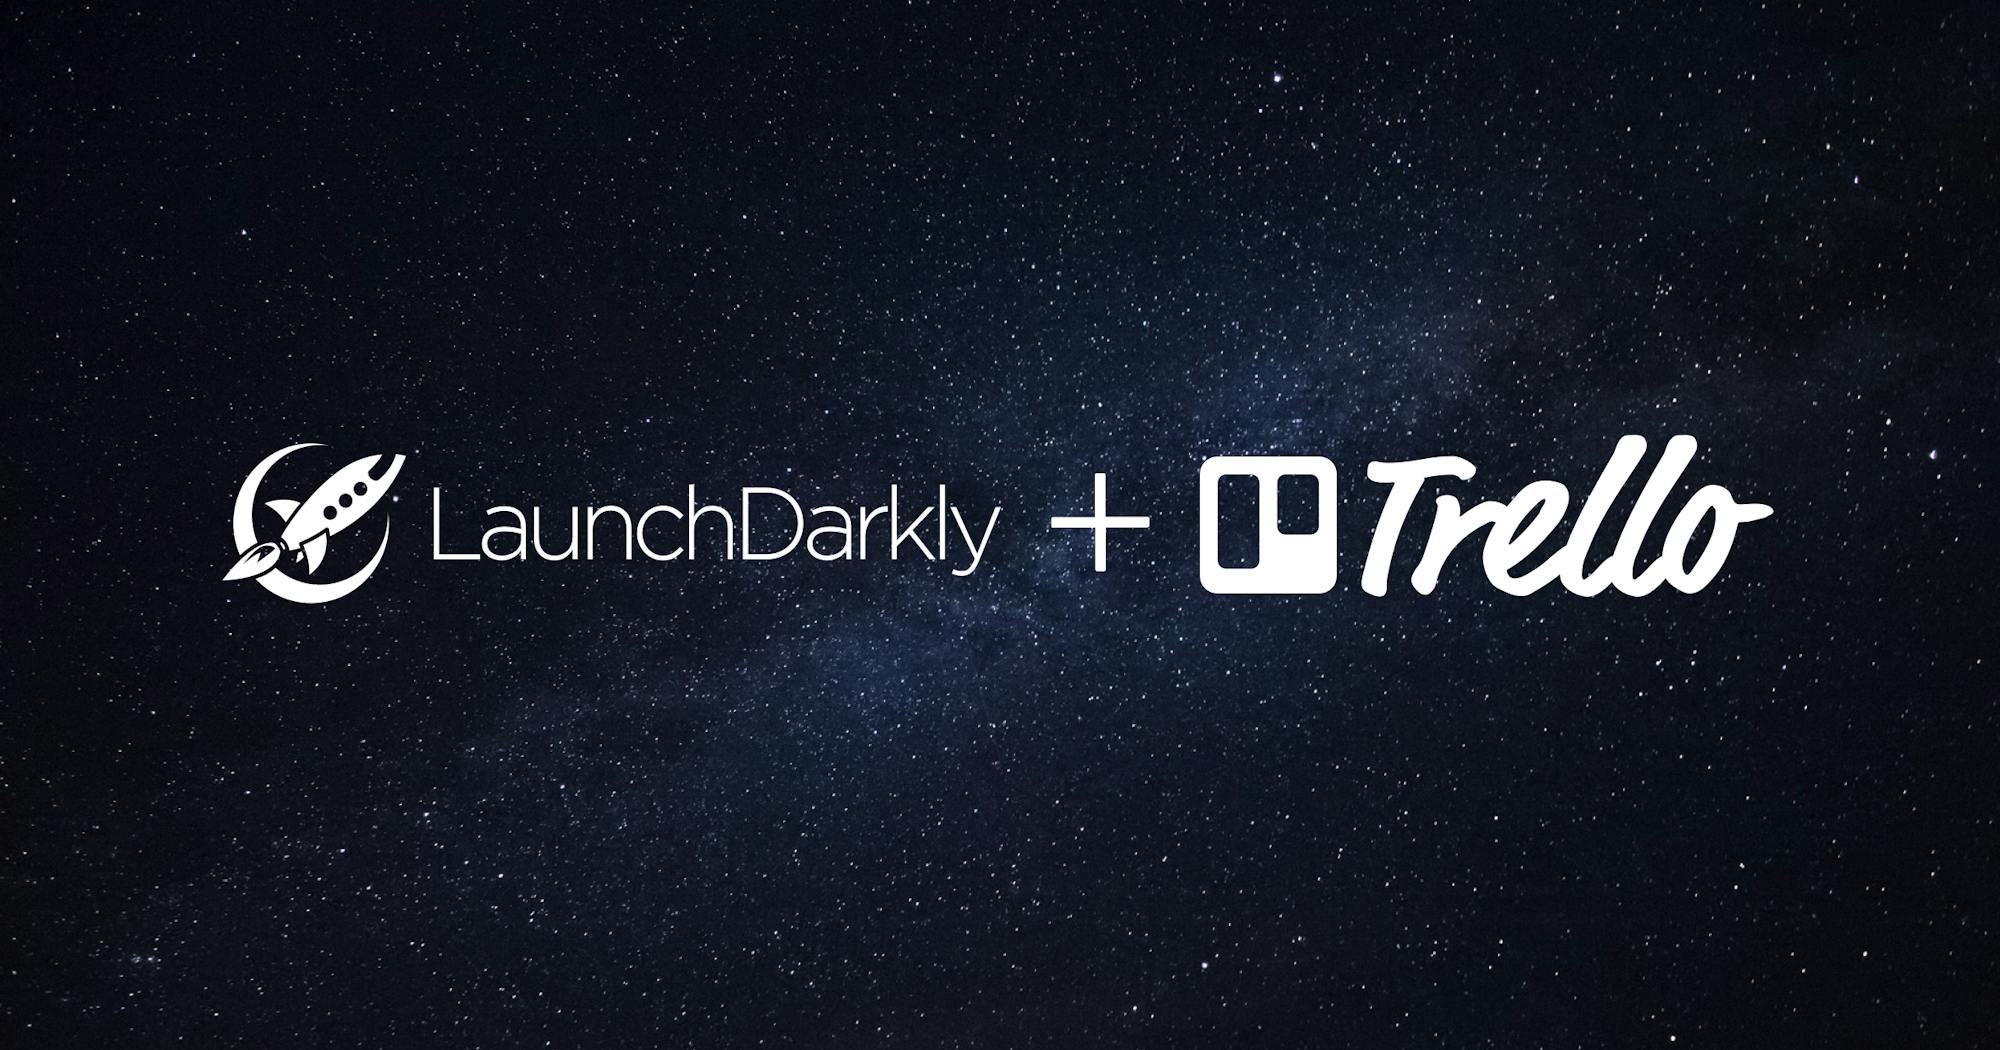 Launched: Trello Integration featured image